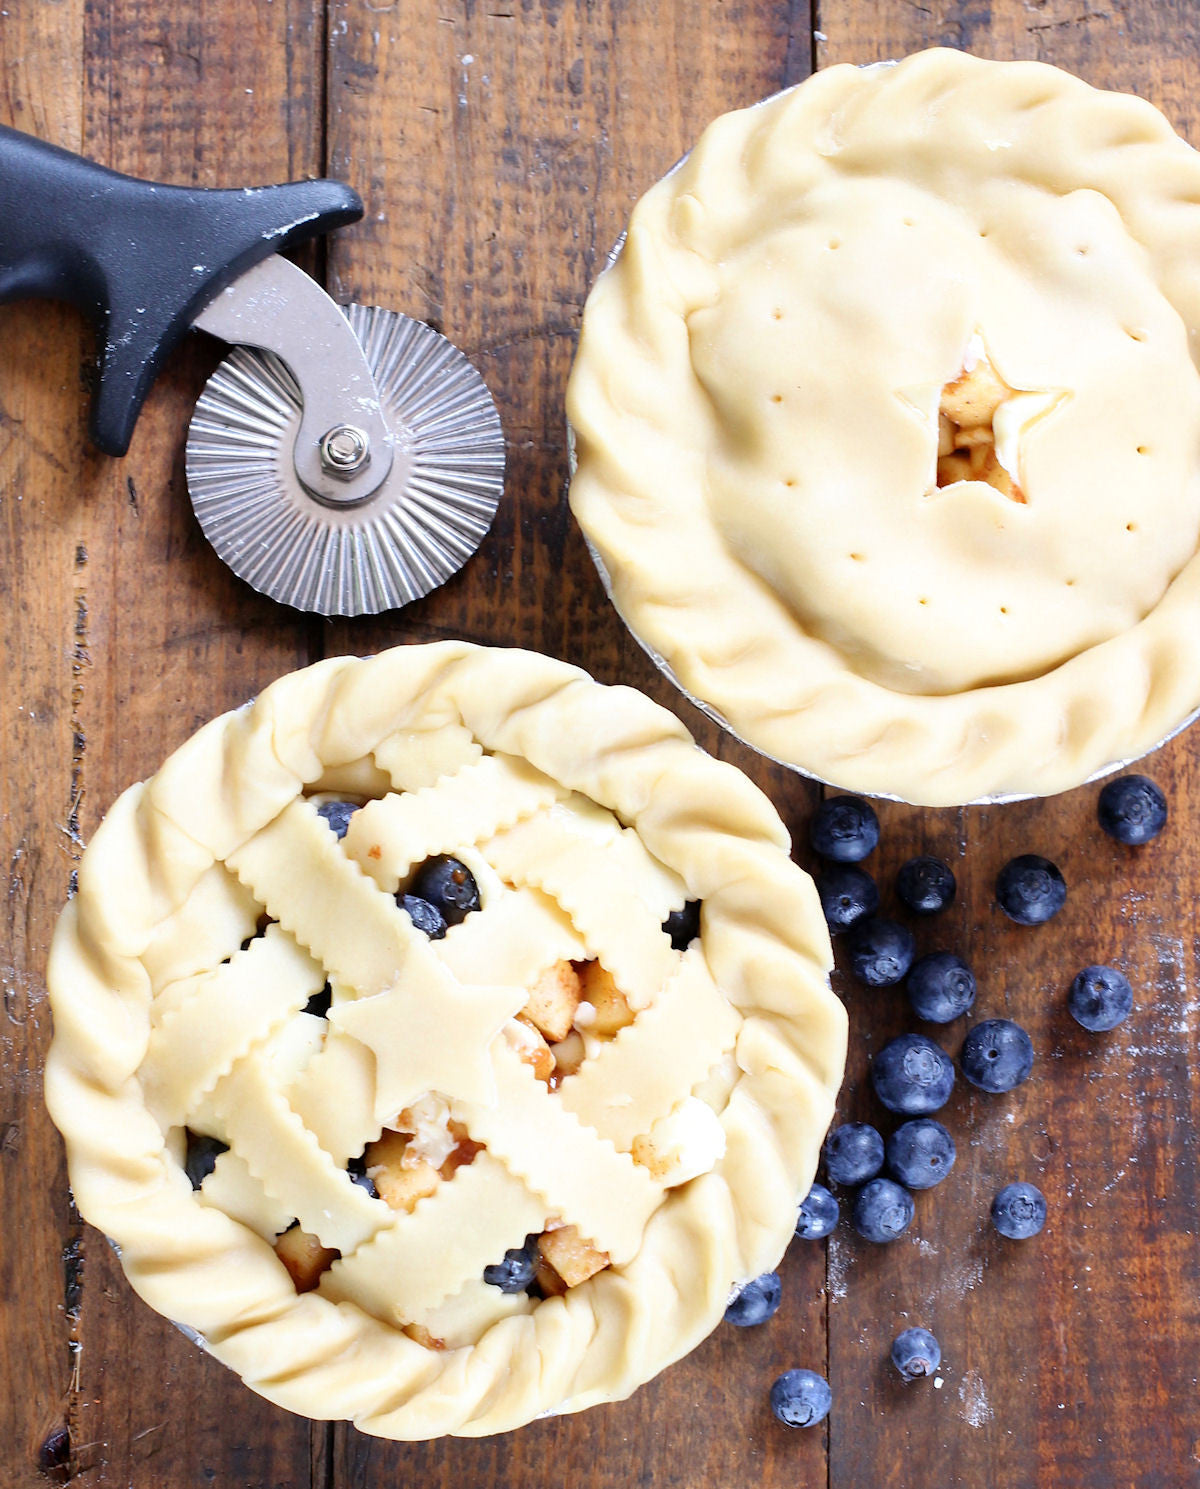 Go-to Pastry Dough Recipe for Pies, Quiches & Tarts